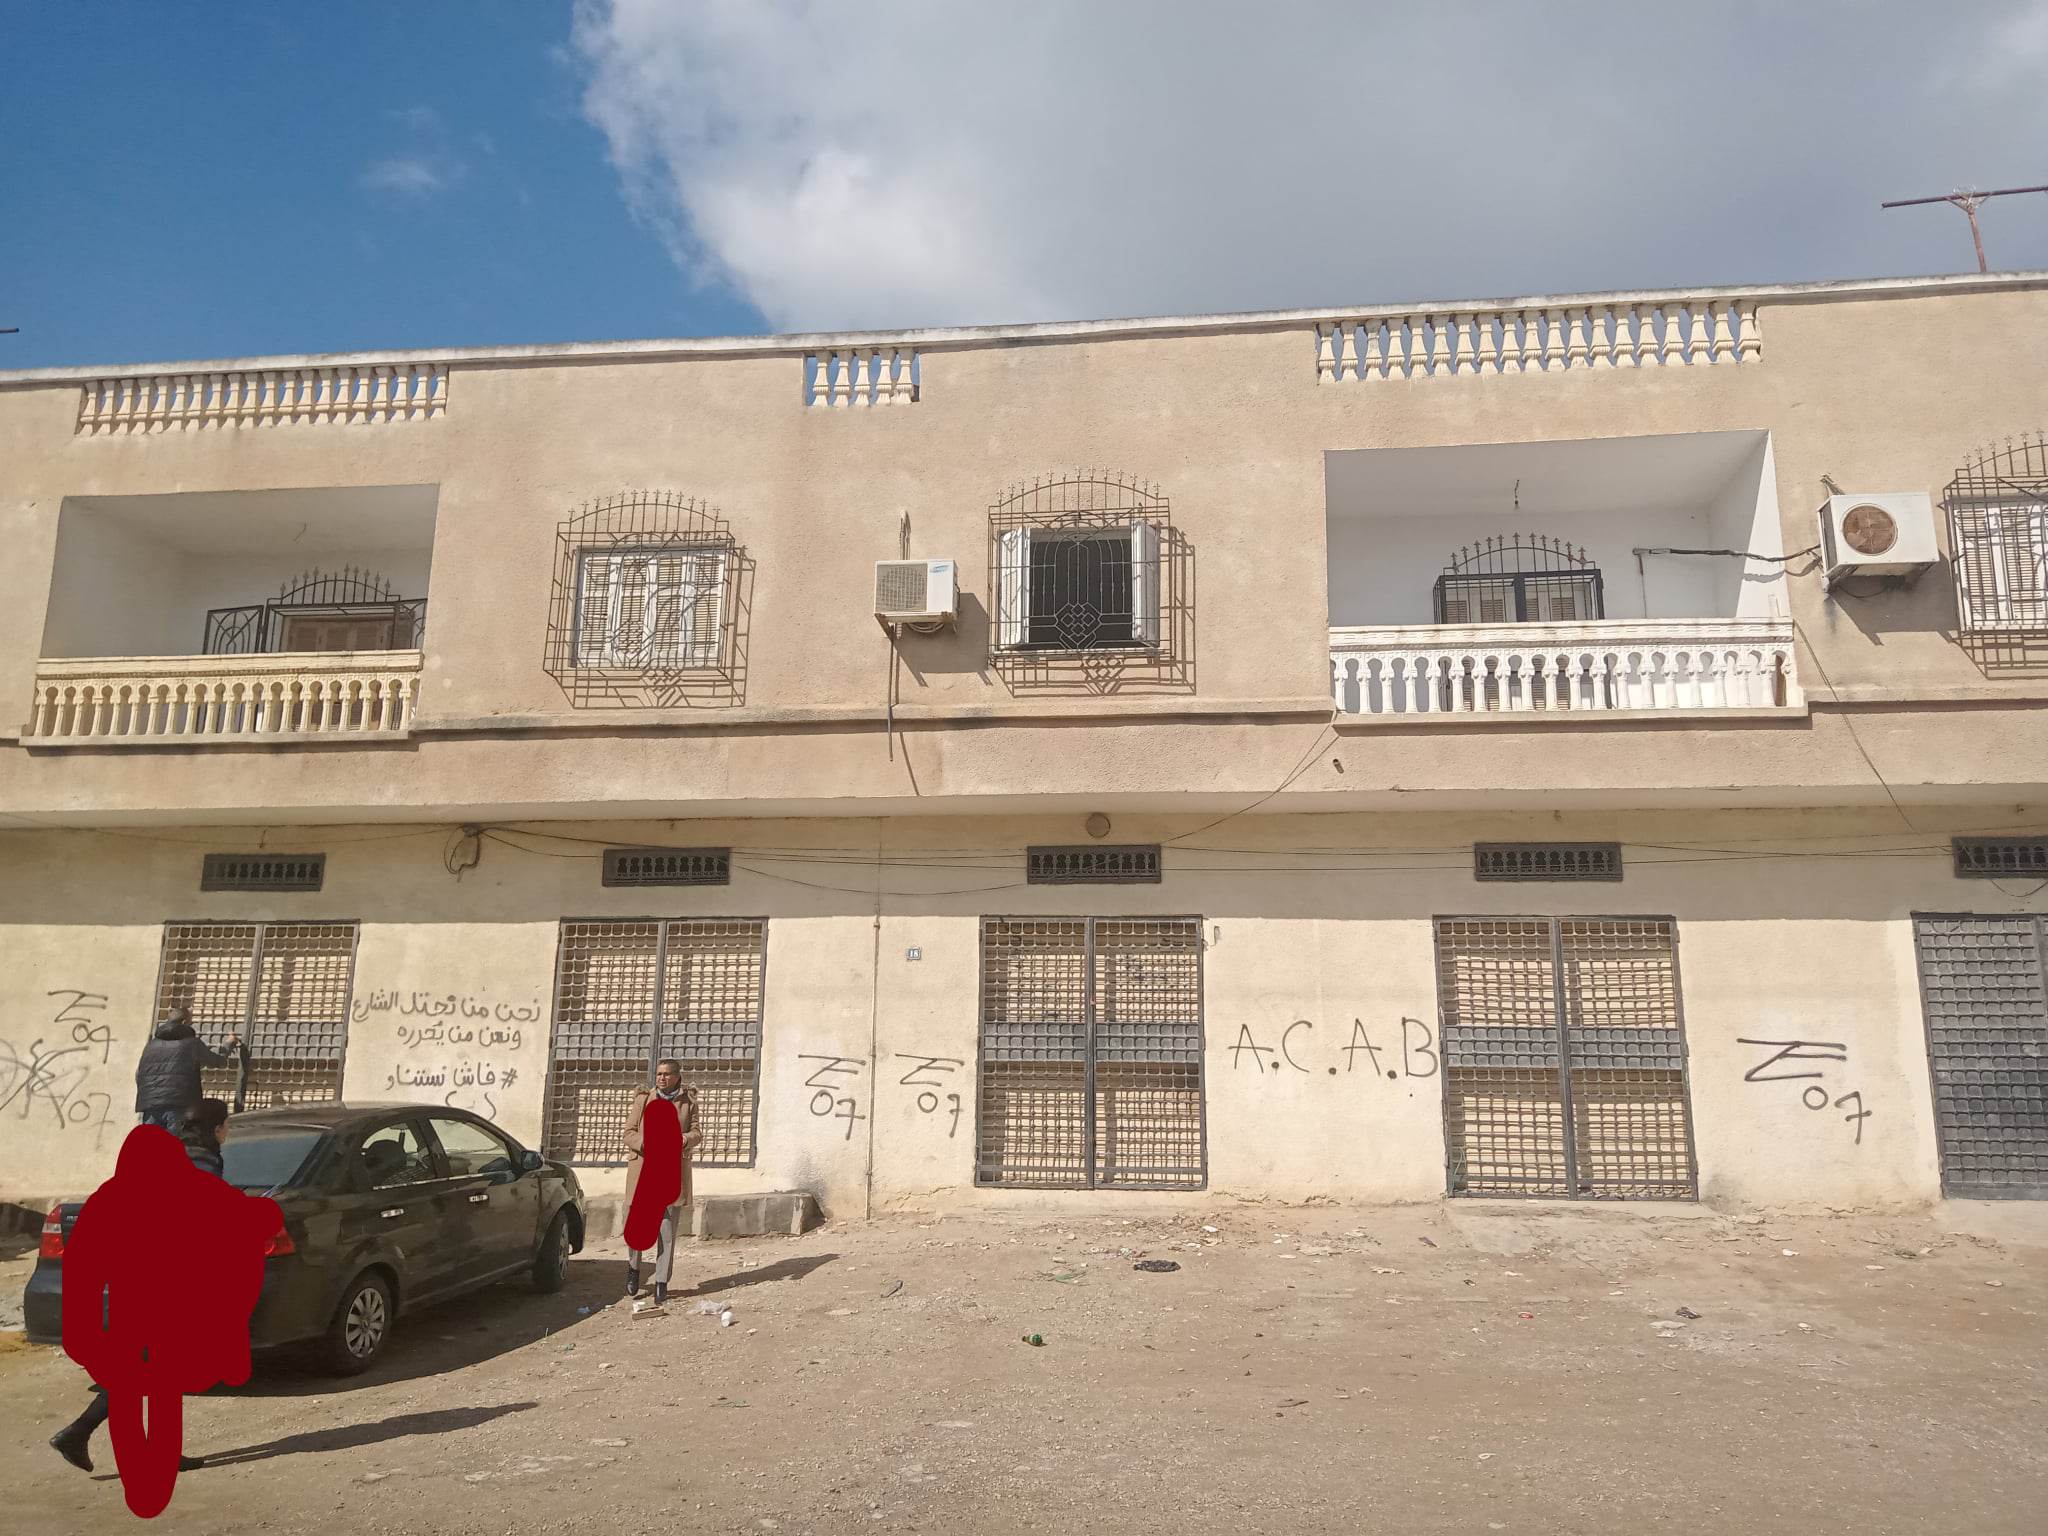 Oued Ellil Oued Ellil Vente Autre Local commercial  oued ellil chebaw